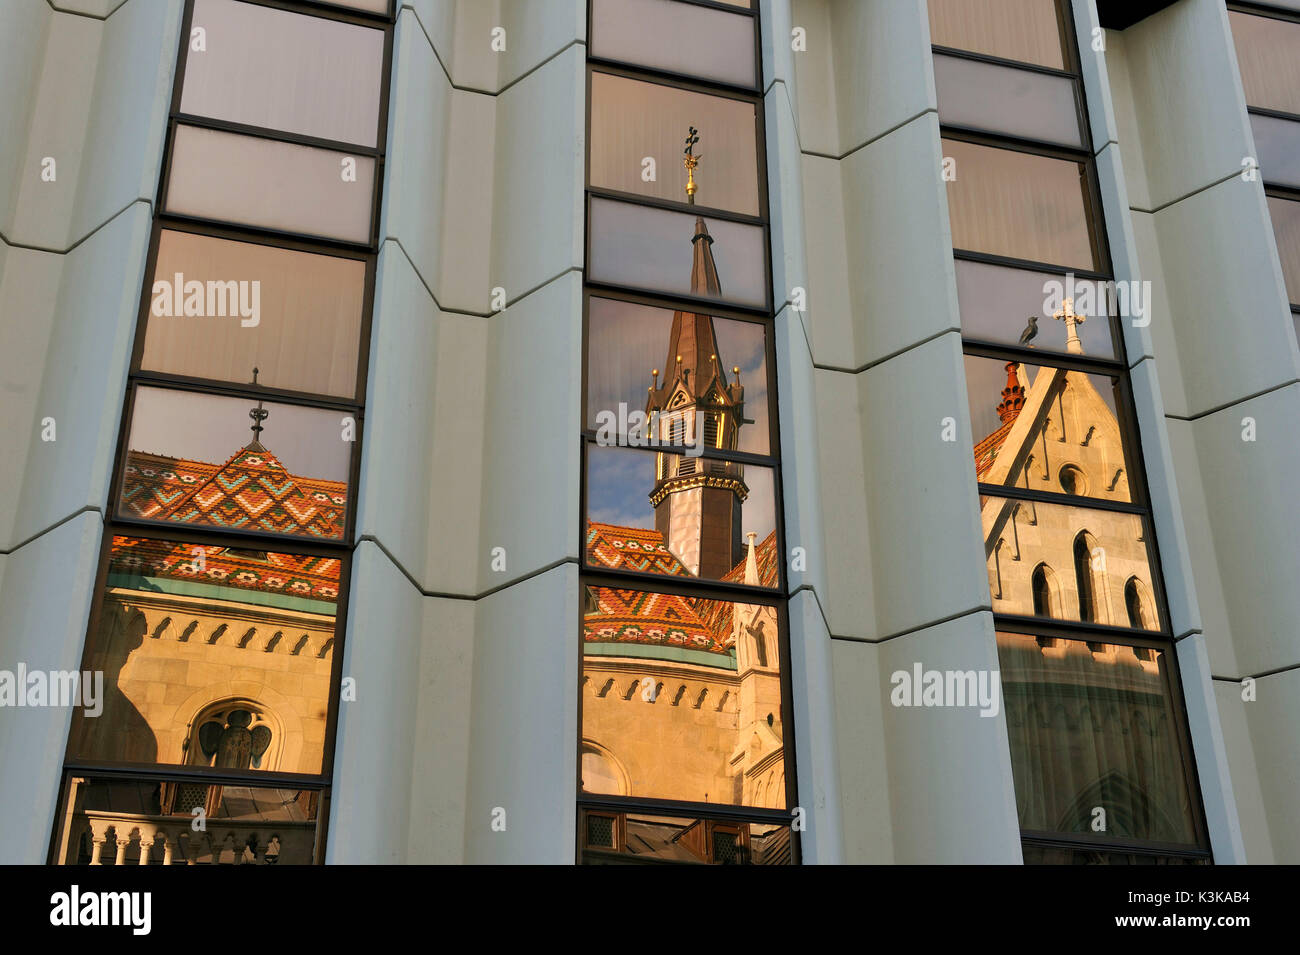 Hungary, Budapest, Buda district, Mathias church reflecting on Hilton Hotel 's windows, Castle Hill listed as World Heritage by UNESCO Stock Photo